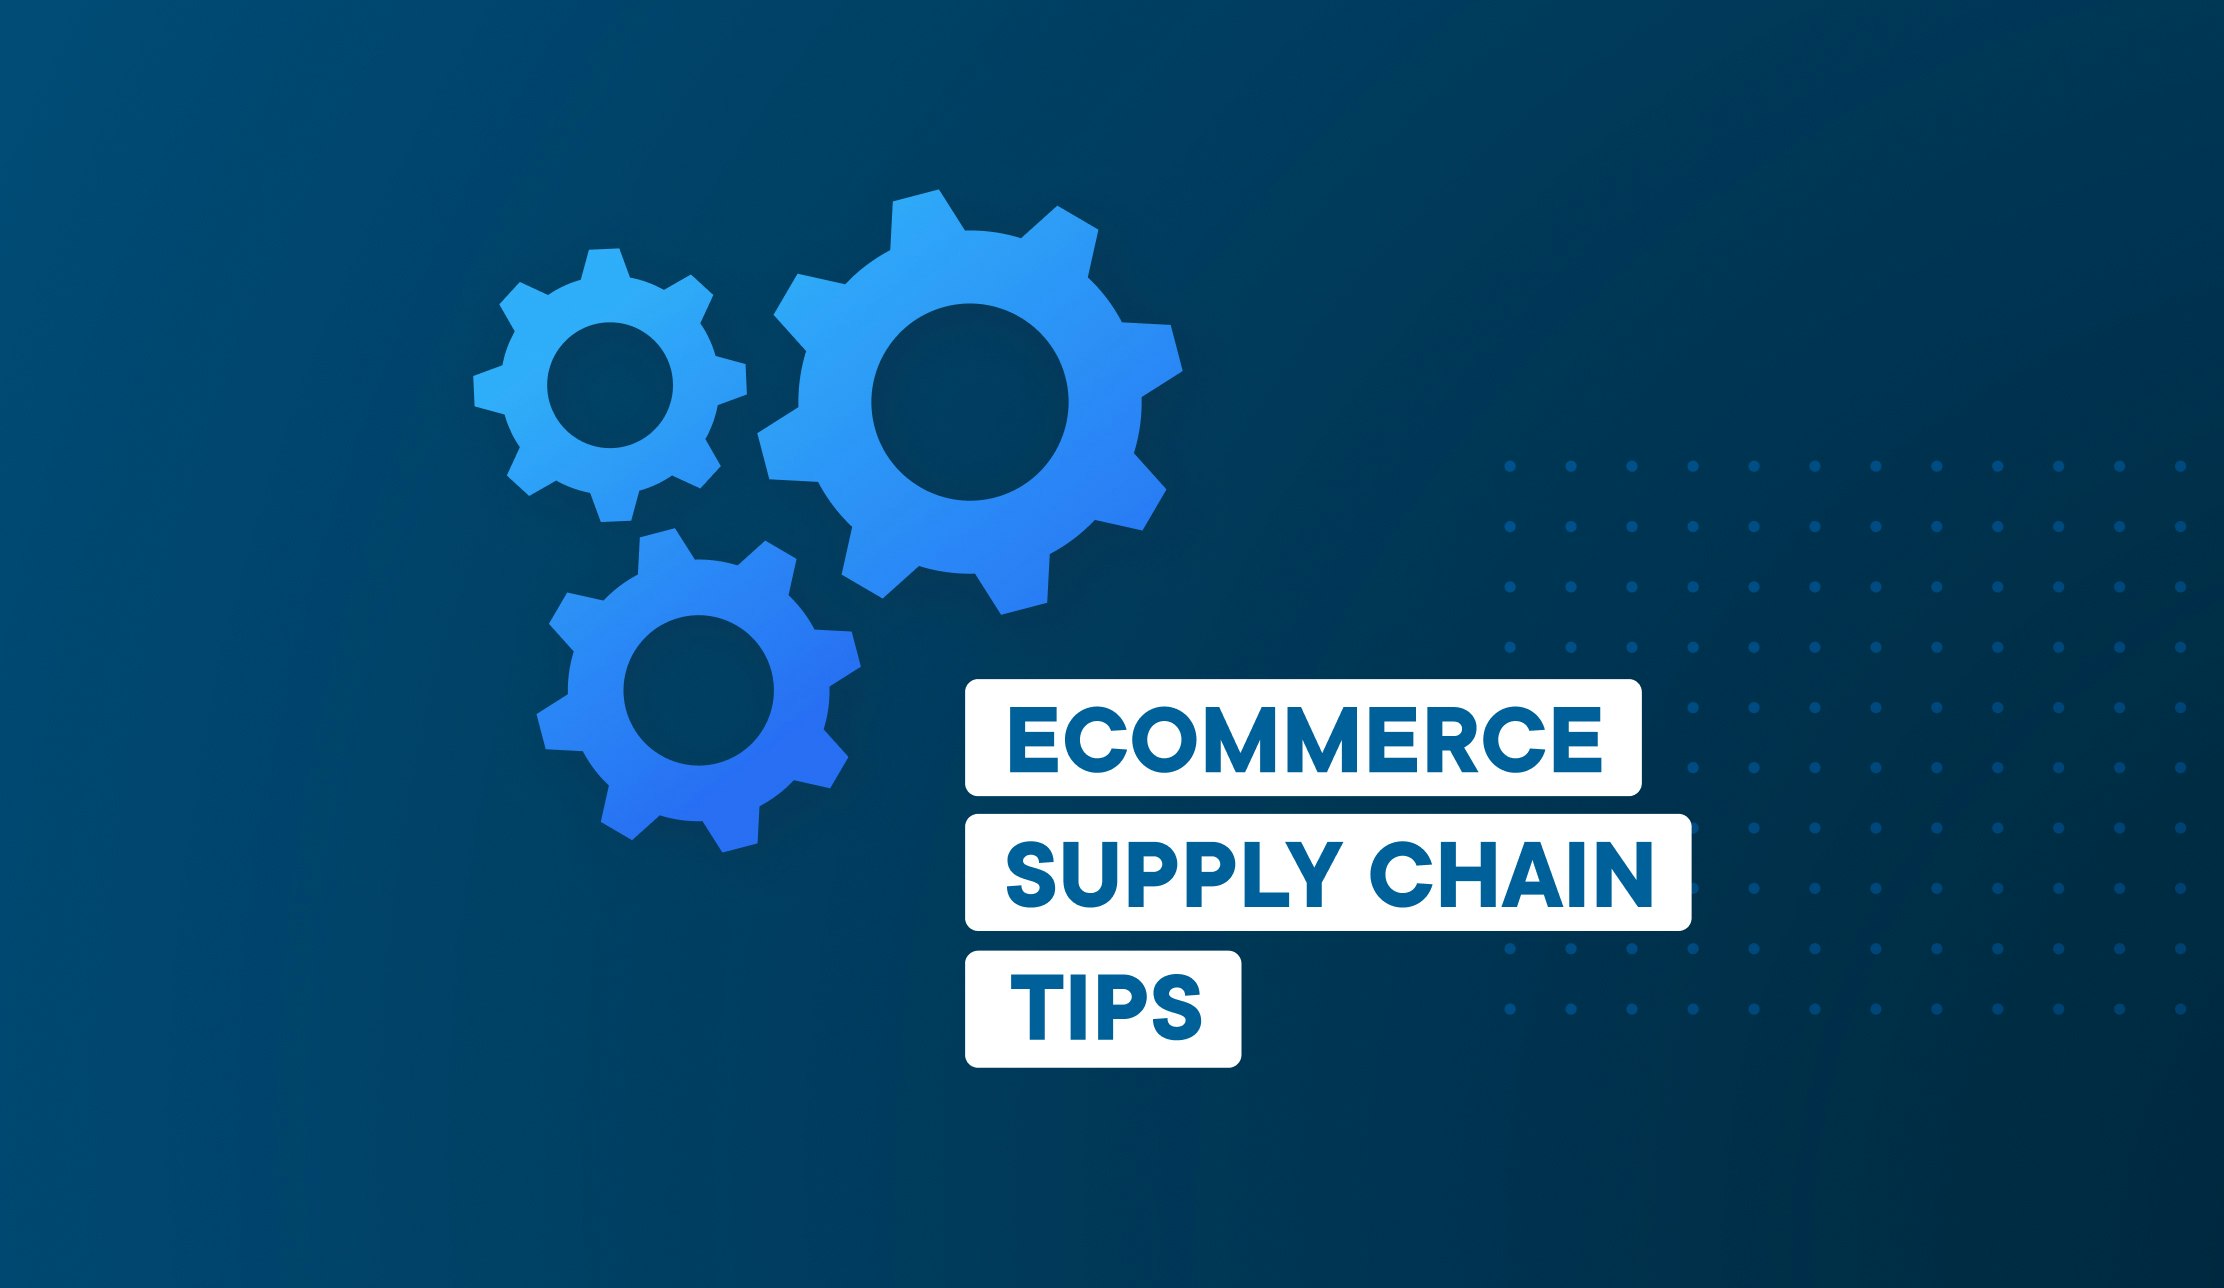 ecommerce supply chain tips